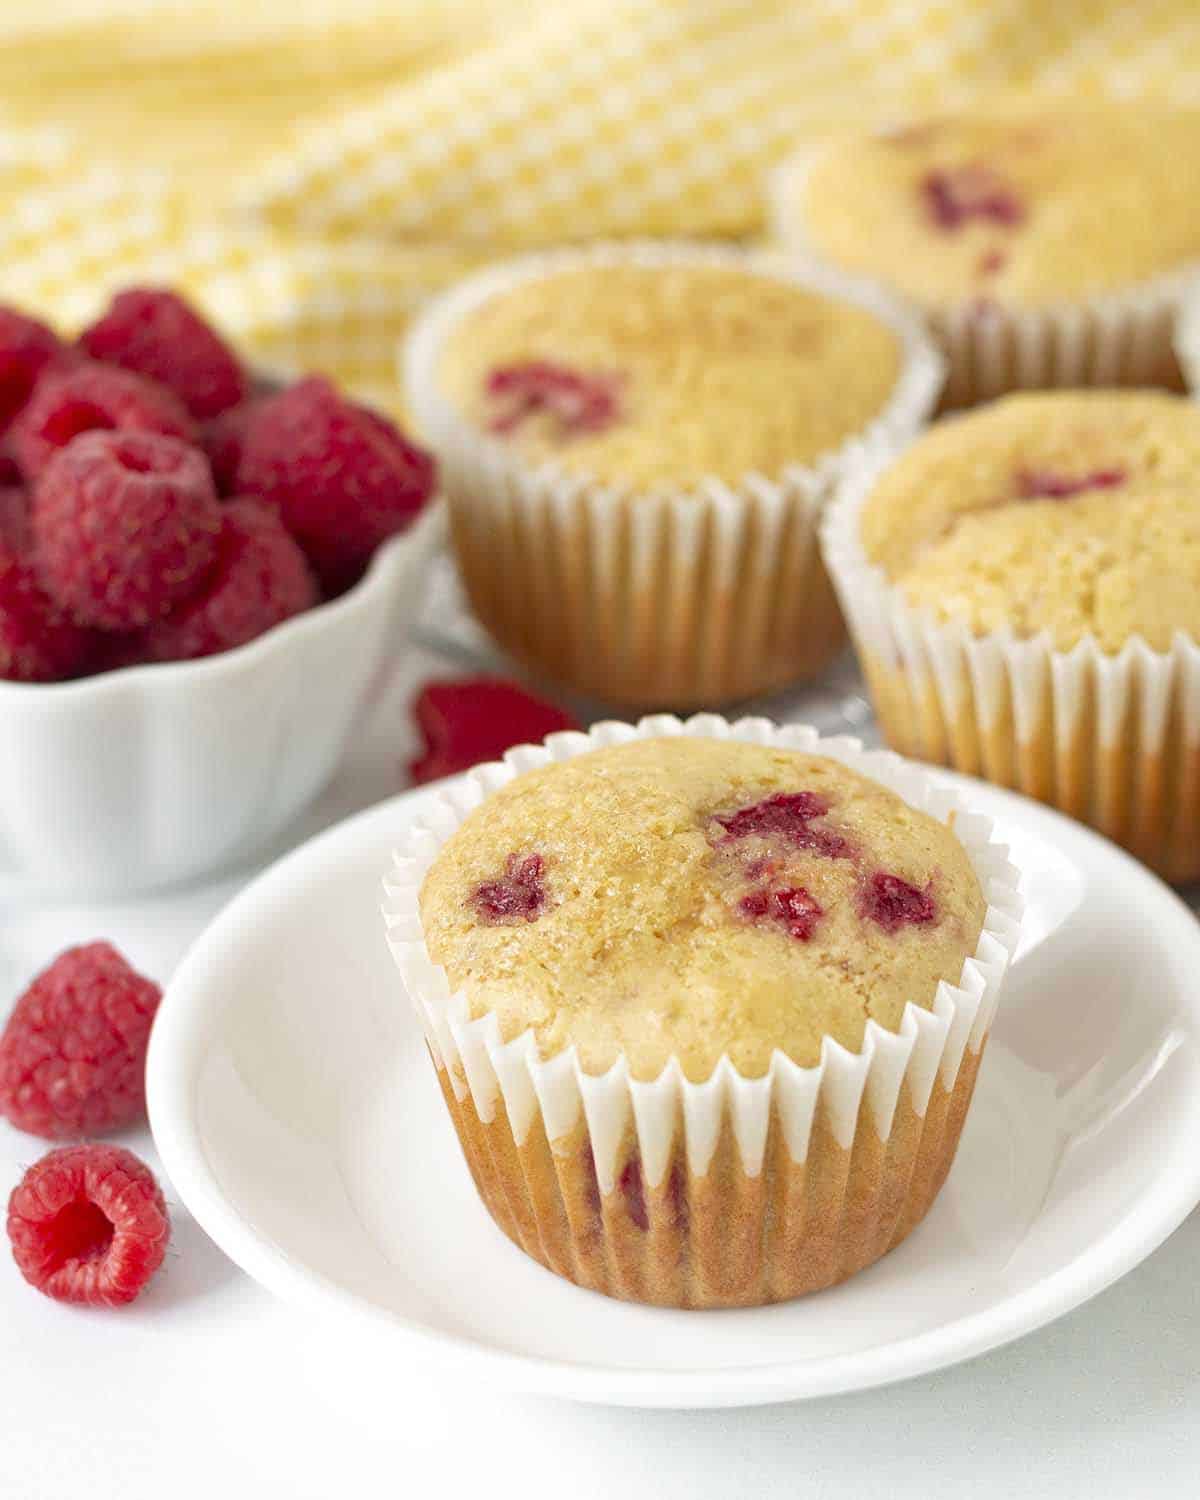 A gluten-free raspberry muffin on a small white plate.